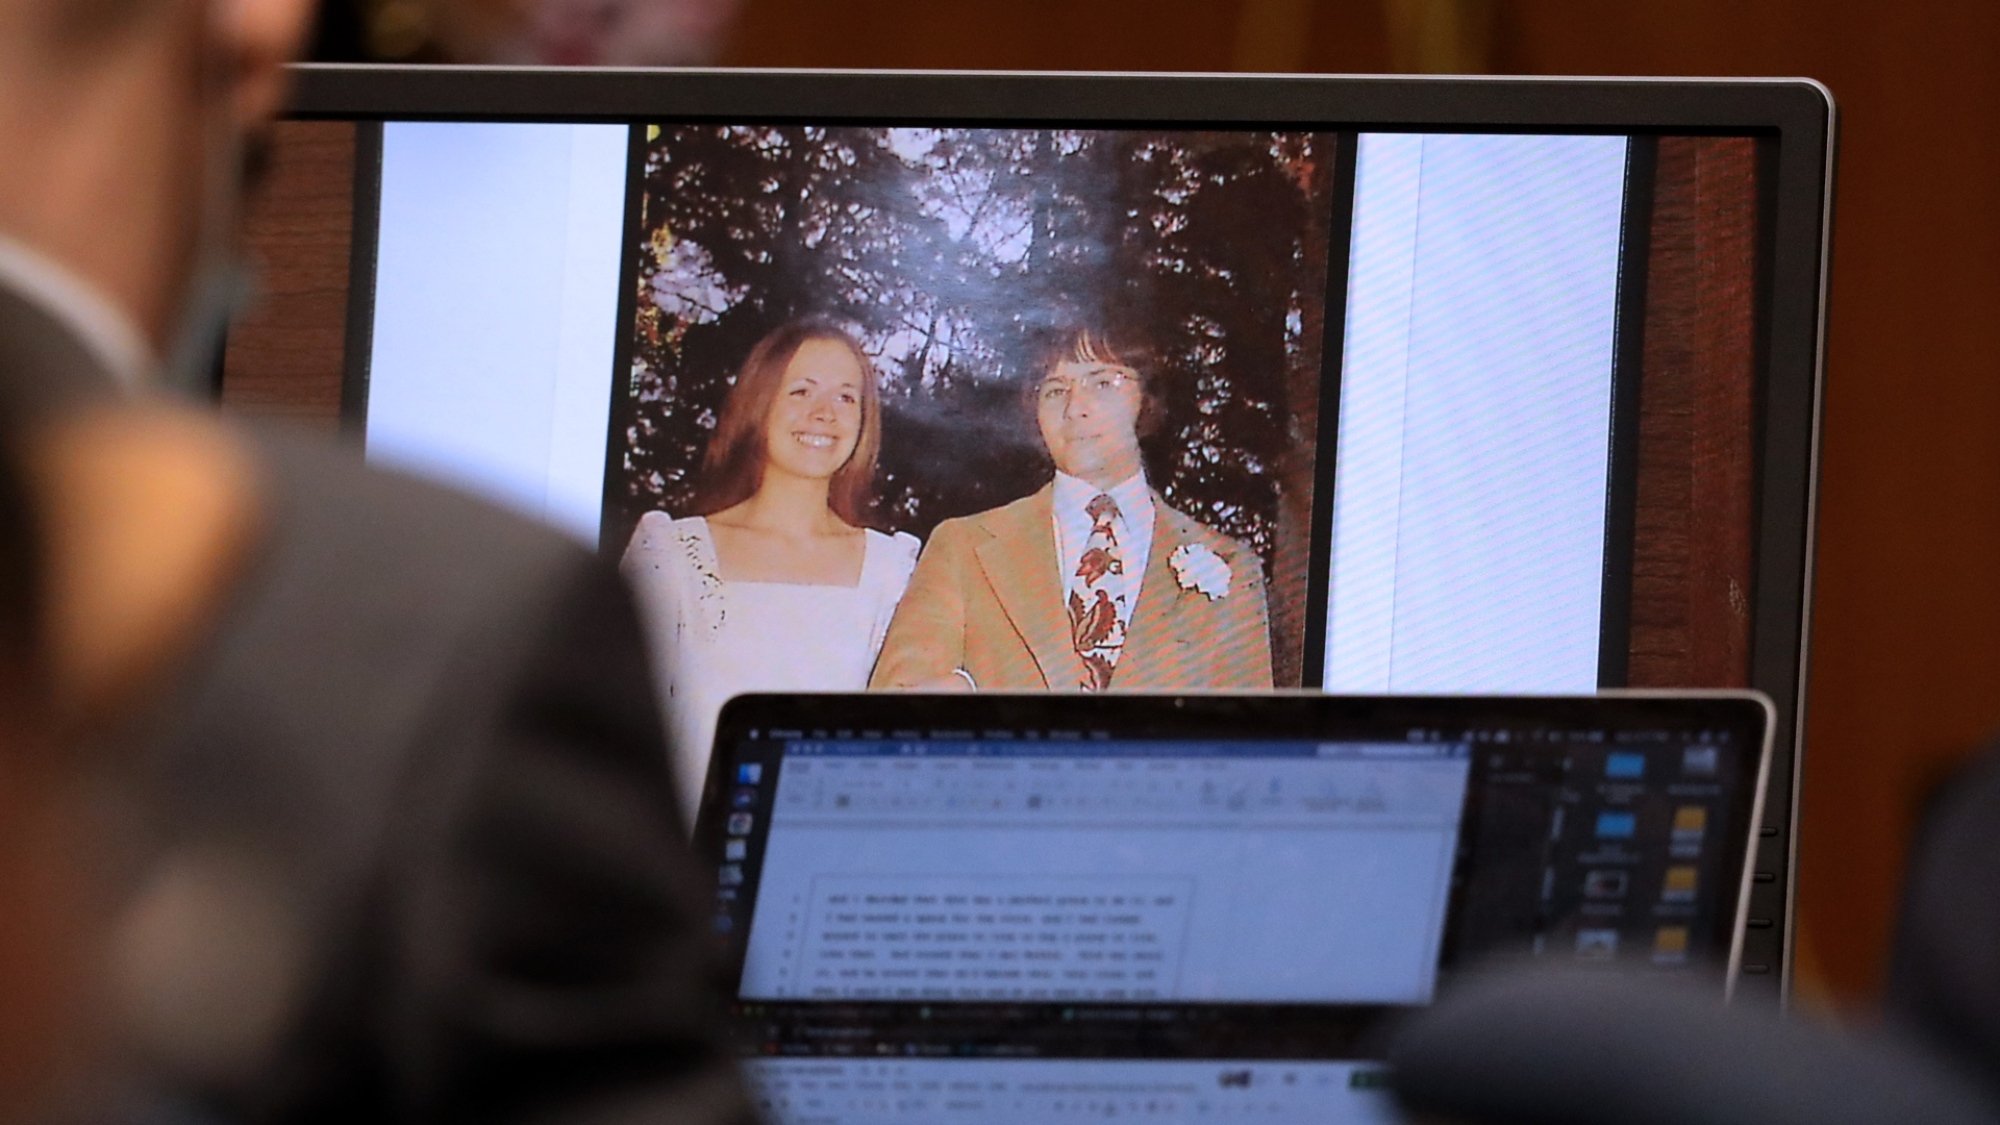 A photo of Robert Durst and former wife Kathie McCormack on their wedding day in 1973 is shown while Robert Durst takes the stand and testifies in 2021.